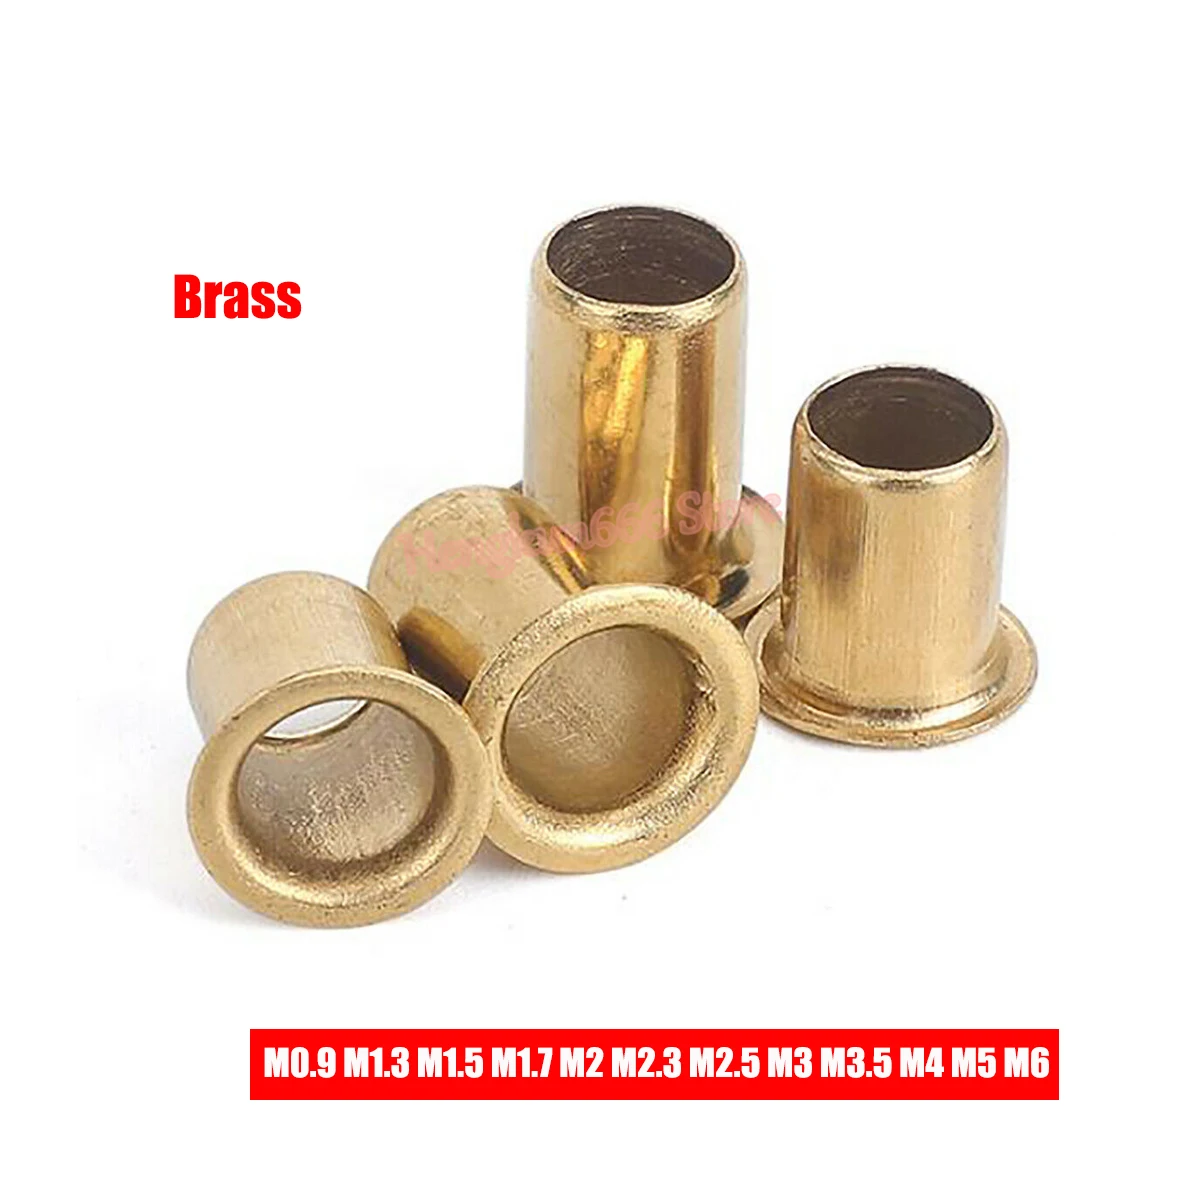 M3-M6 Copper Brass Eyelet Hollow Tubular Rivets Through Nuts Hole Grommets 